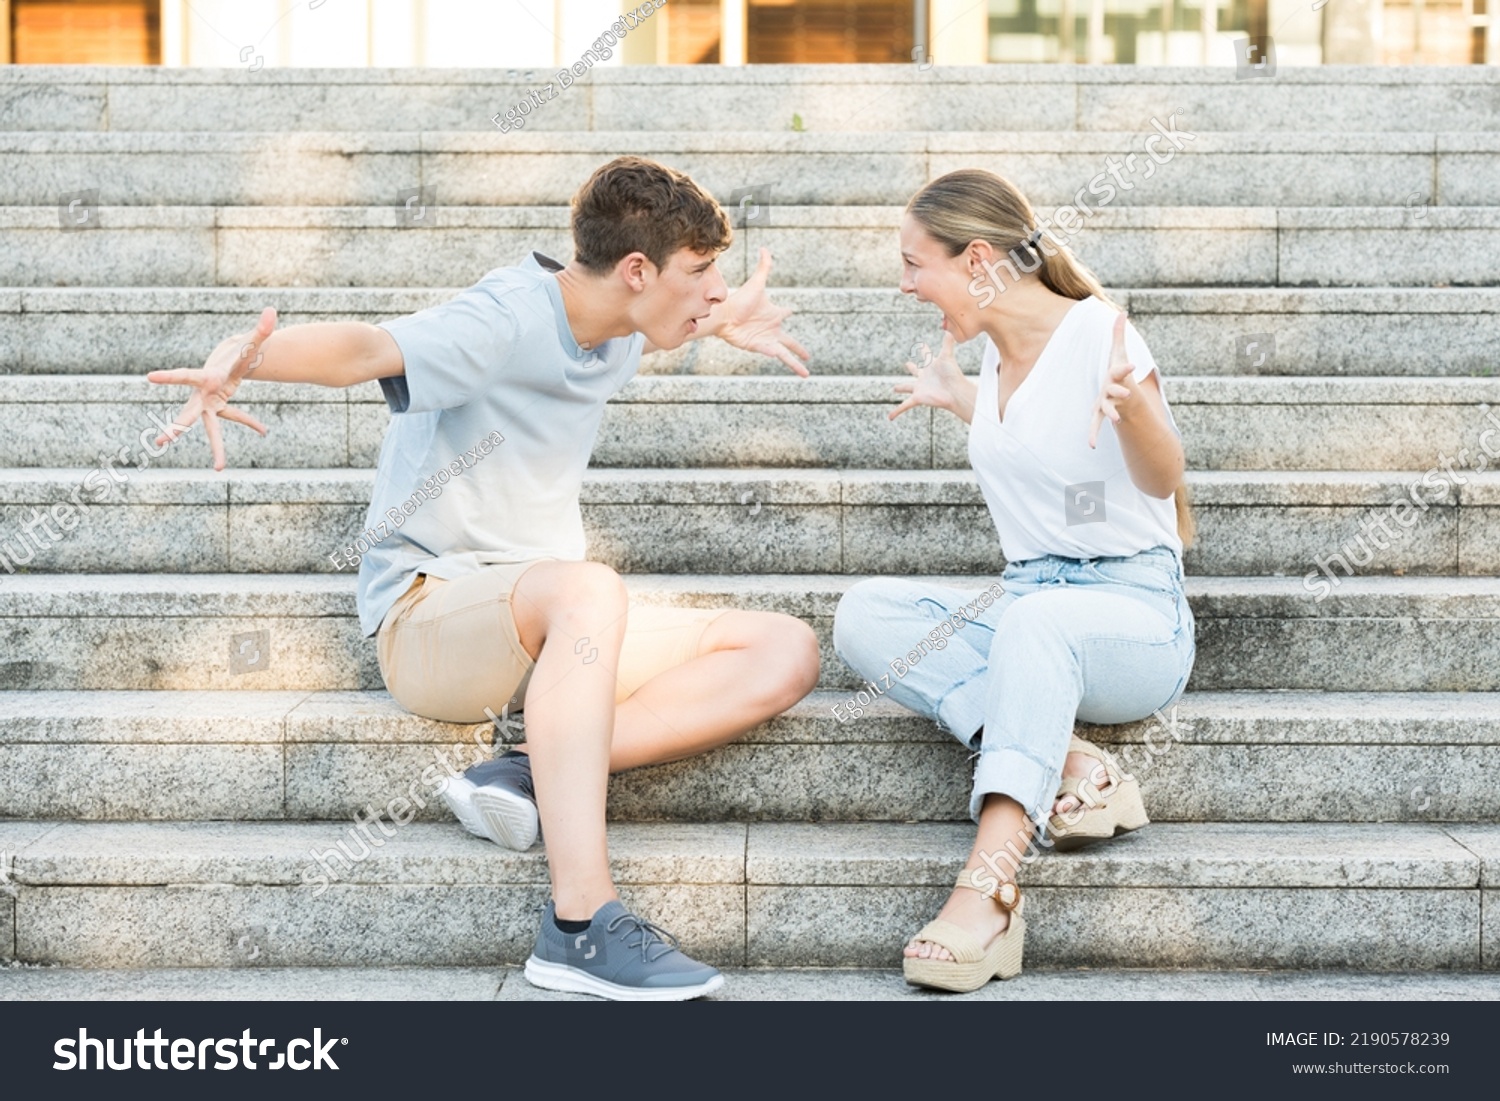 Teenager couple discussion. Toxic relationship concept. Boy and girl shouting sitting on stairs. #2190578239